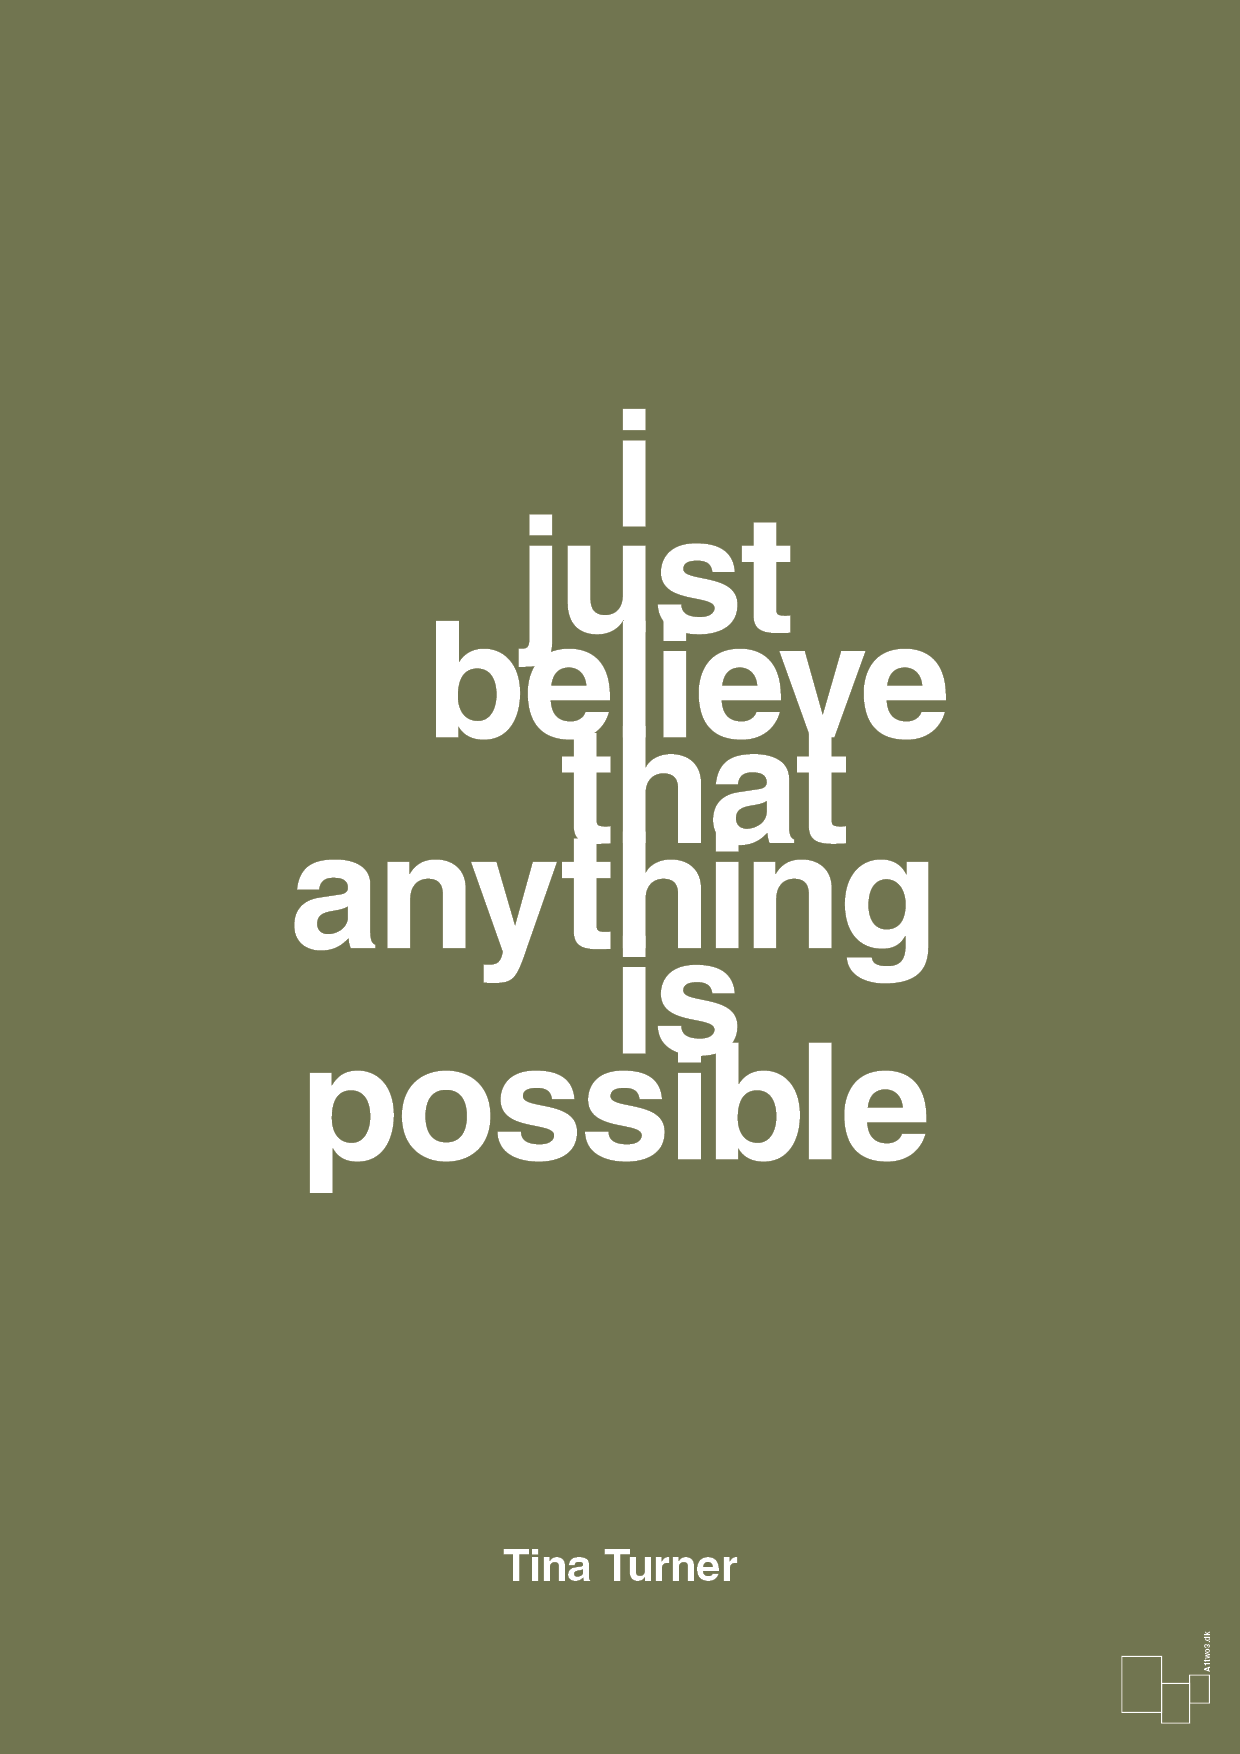 i just believe that anything is possible - Plakat med Citater i Secret Meadow